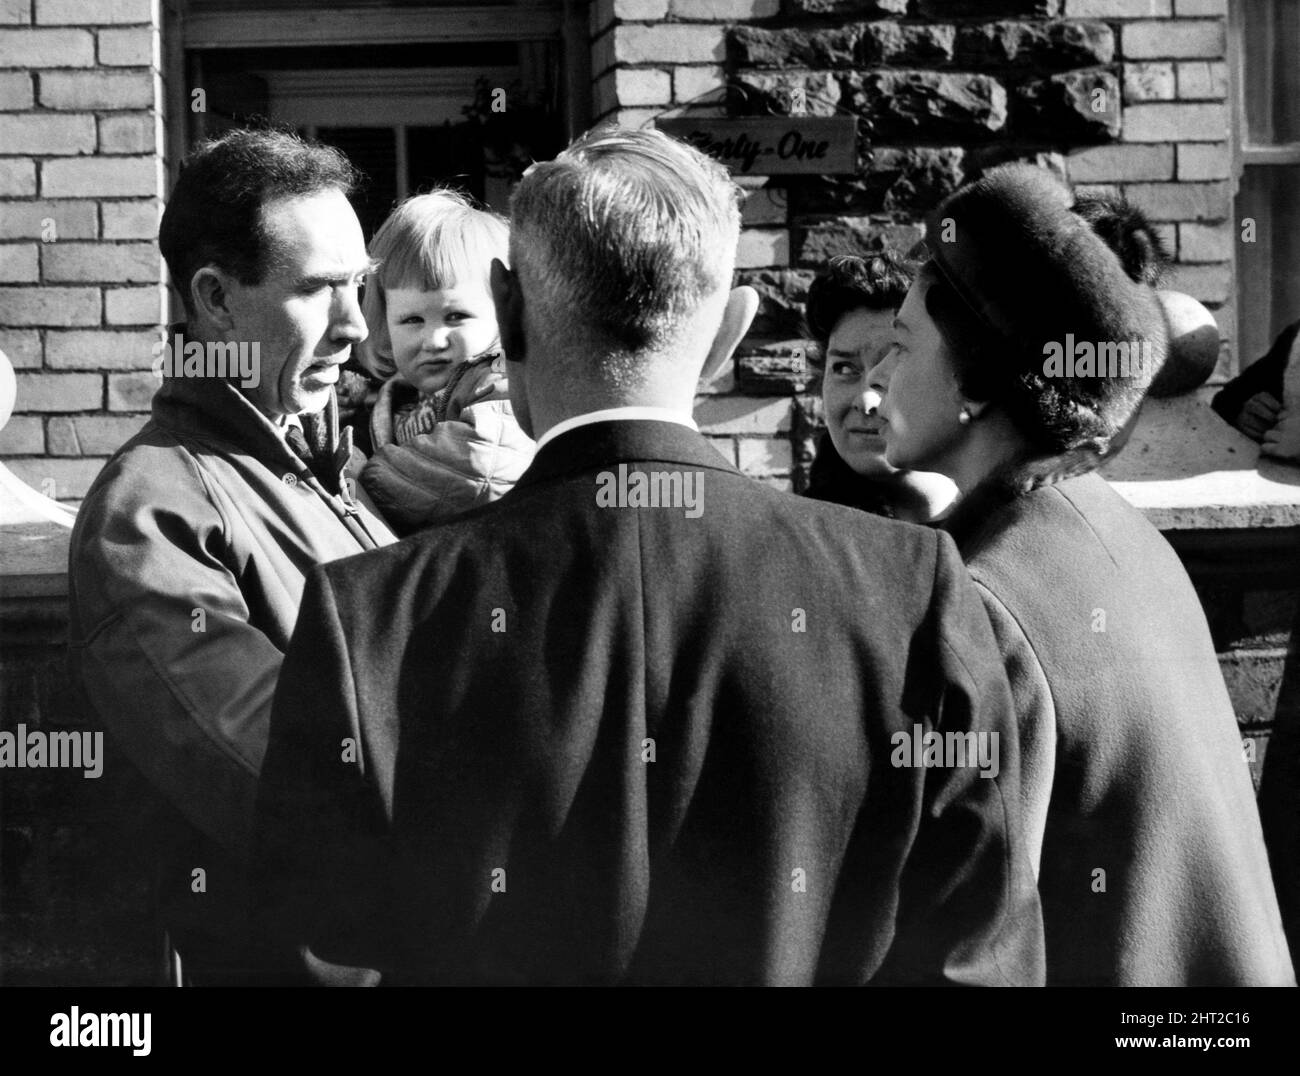 Her Majesty Queen Elizabeth II  listens to a father recalling the day that brought desolation to Aberfan following the tragic landslide. Picture taken 29th October 1966 Stock Photo